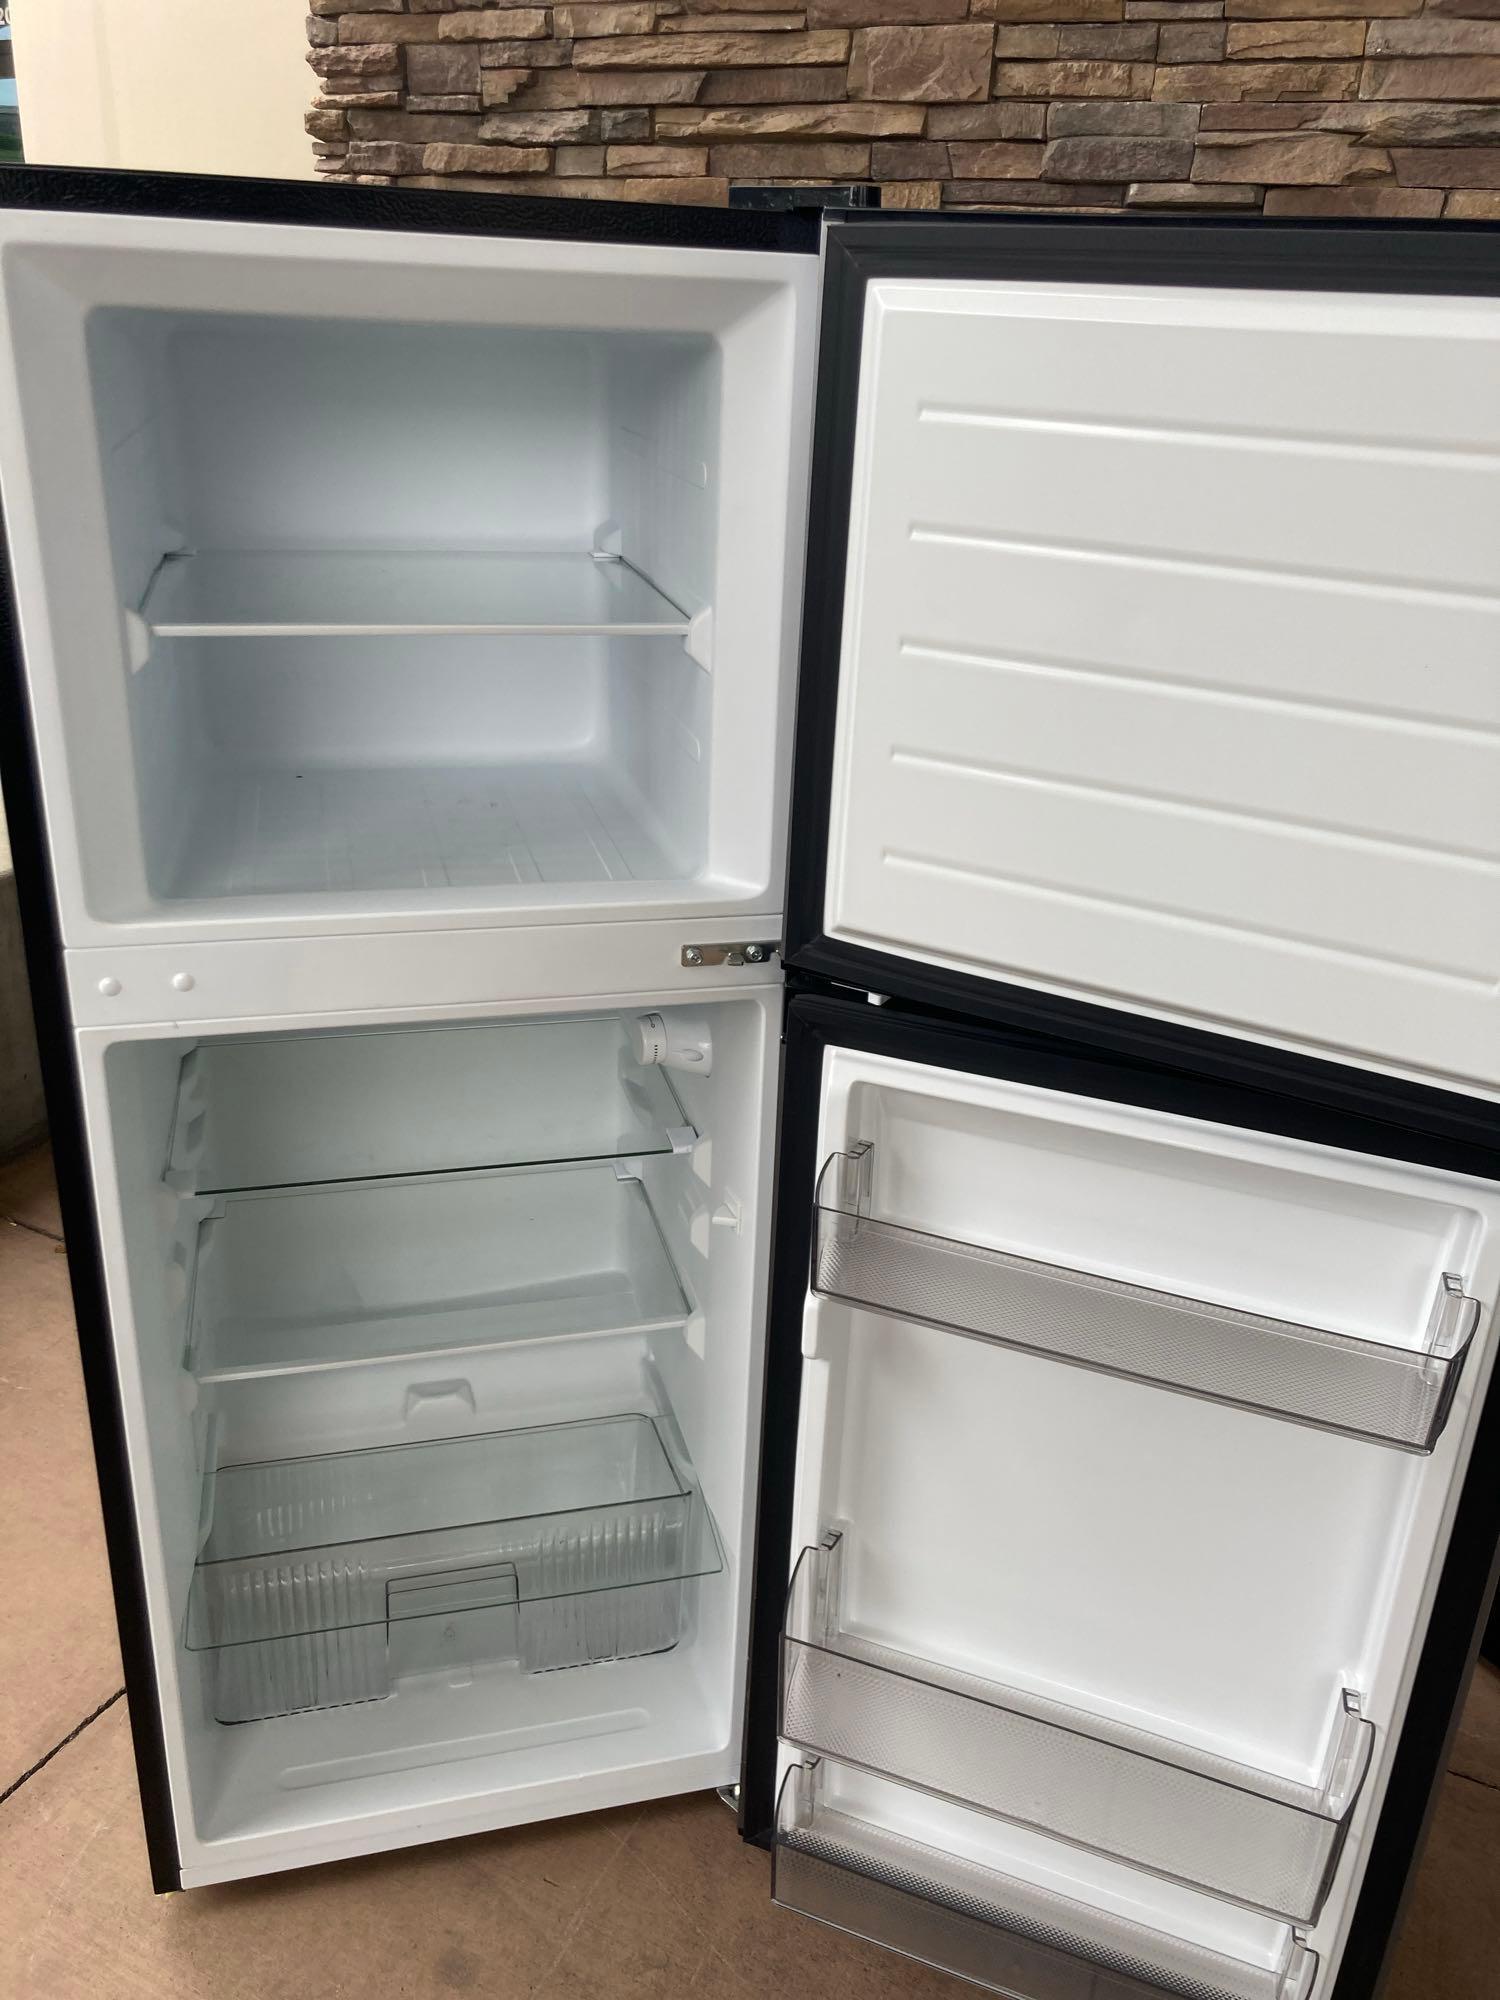 Midea 4.5 cu ft Compact Refrigerator 2 Door*COLD*PREVIOUSLY INSTALLED*